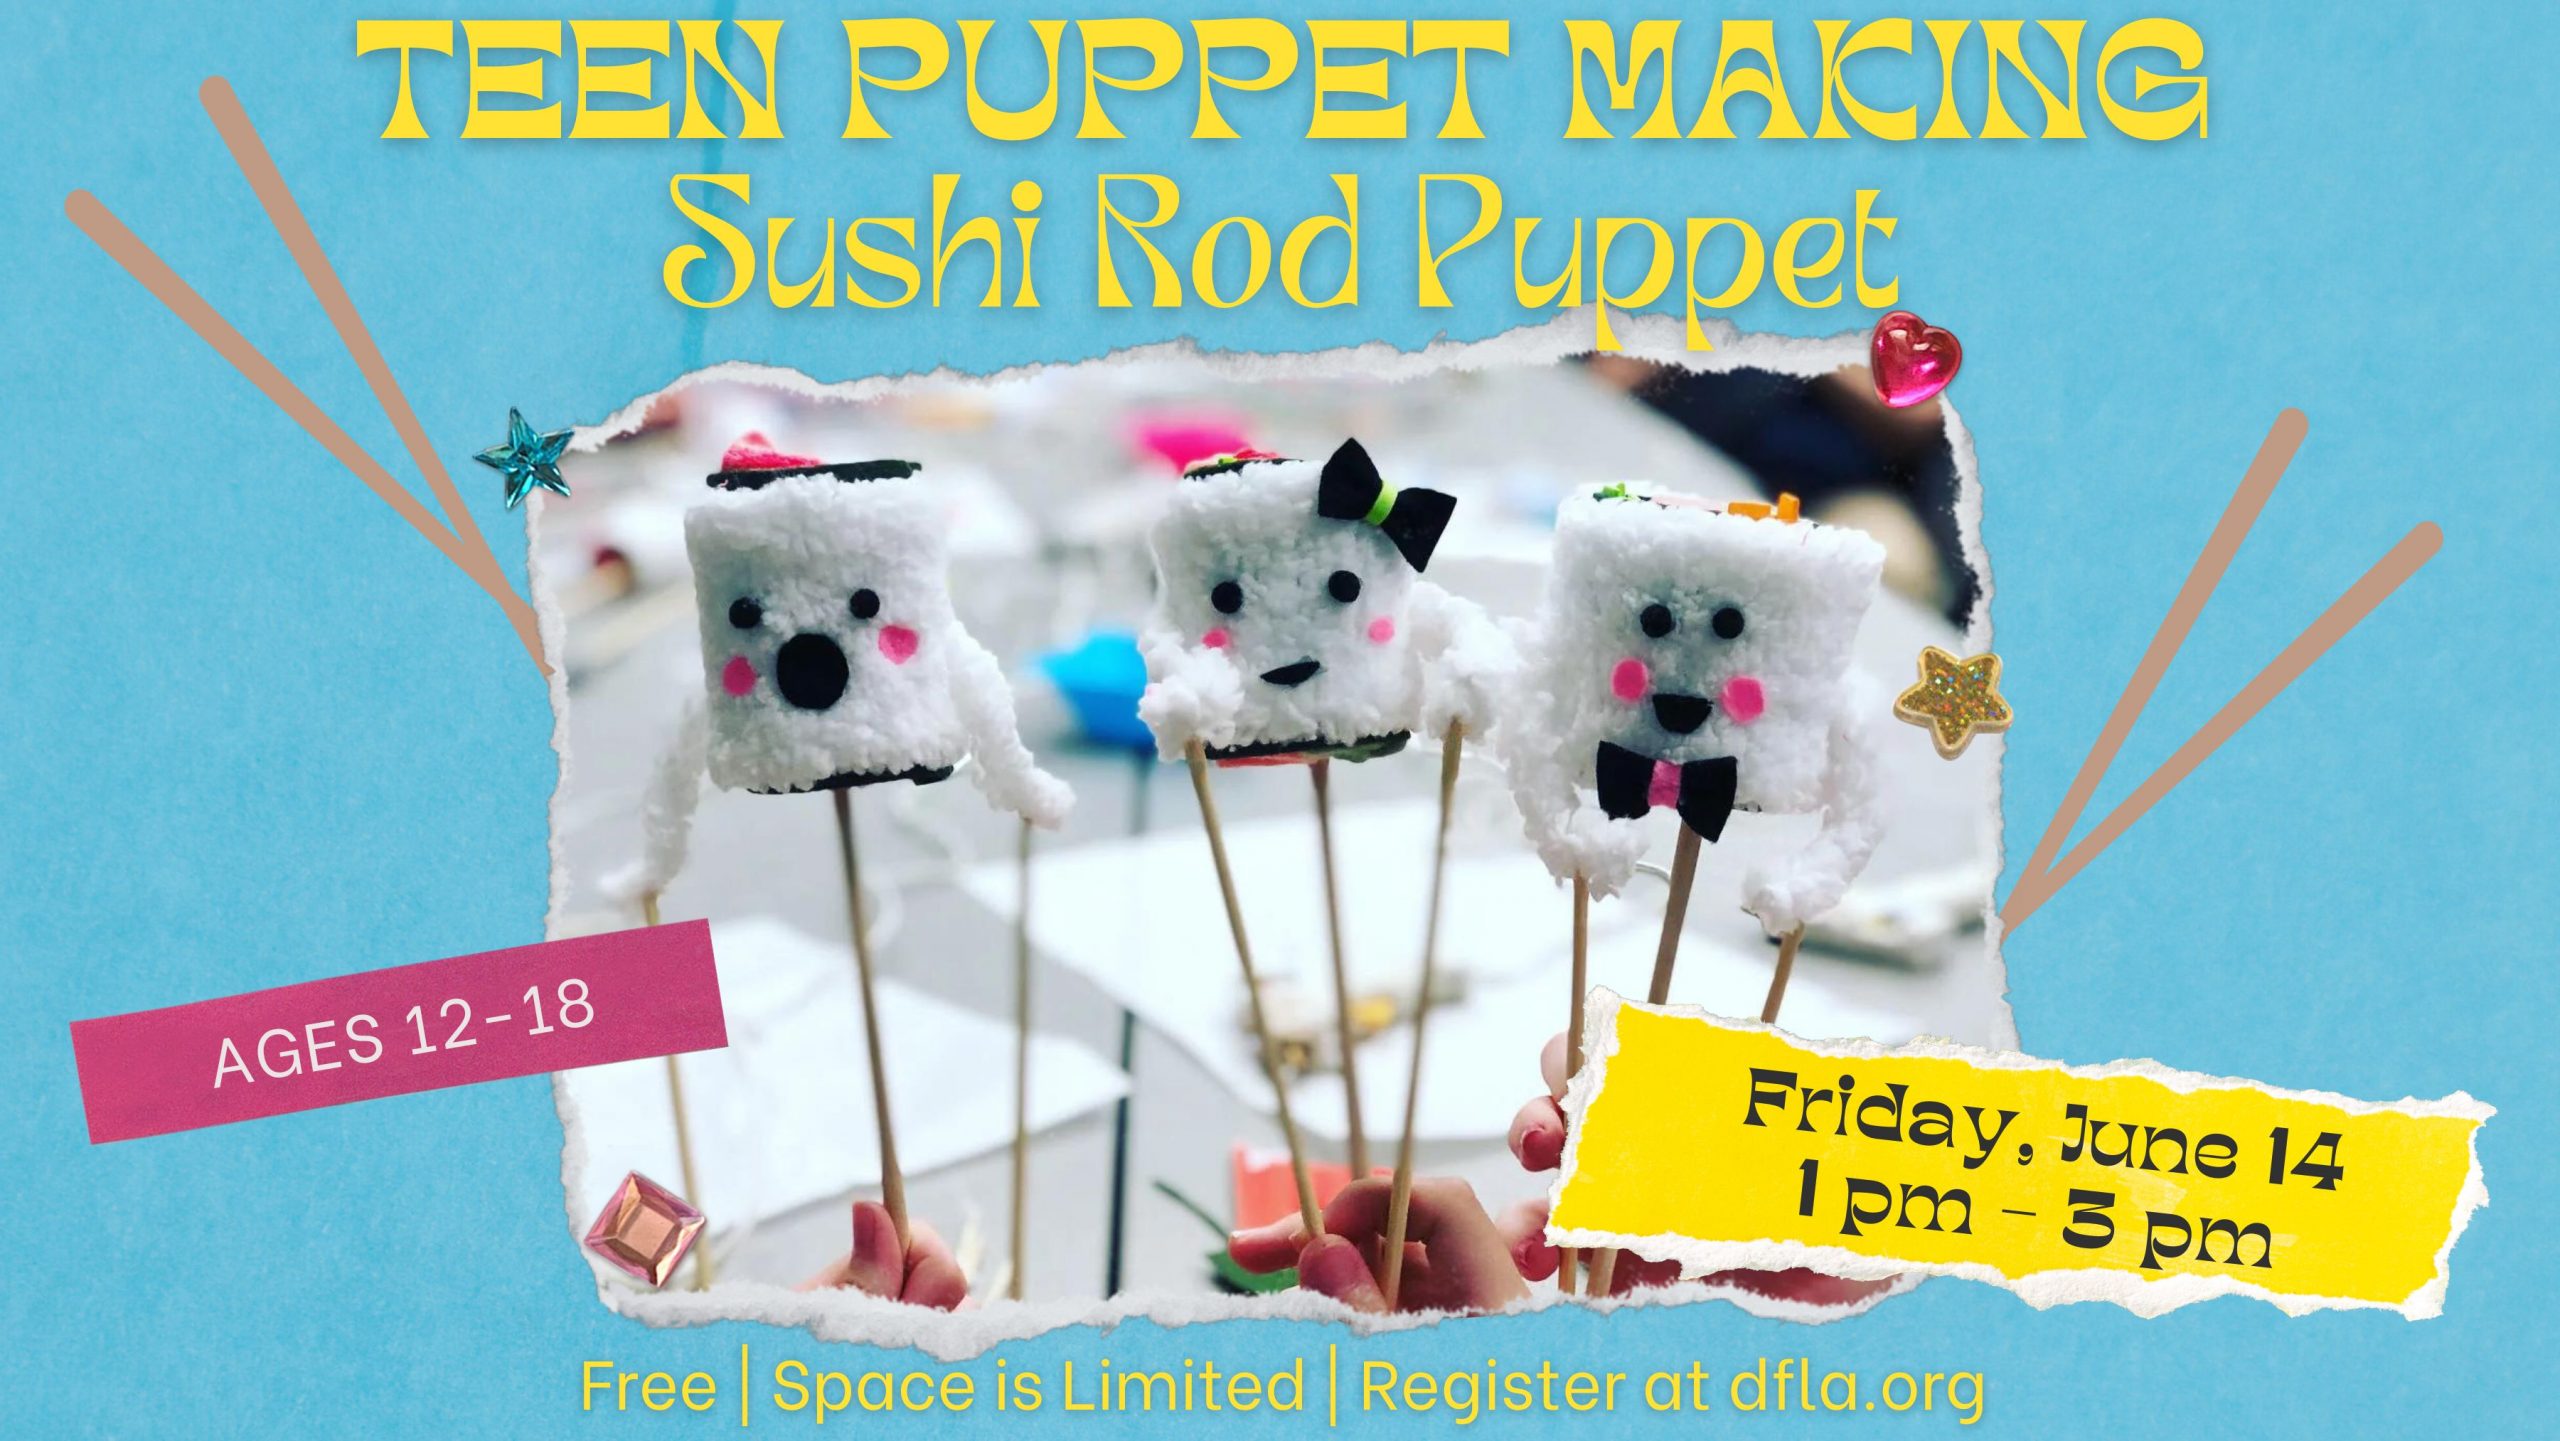 Teen event at the desert foothills library sushi puppet making